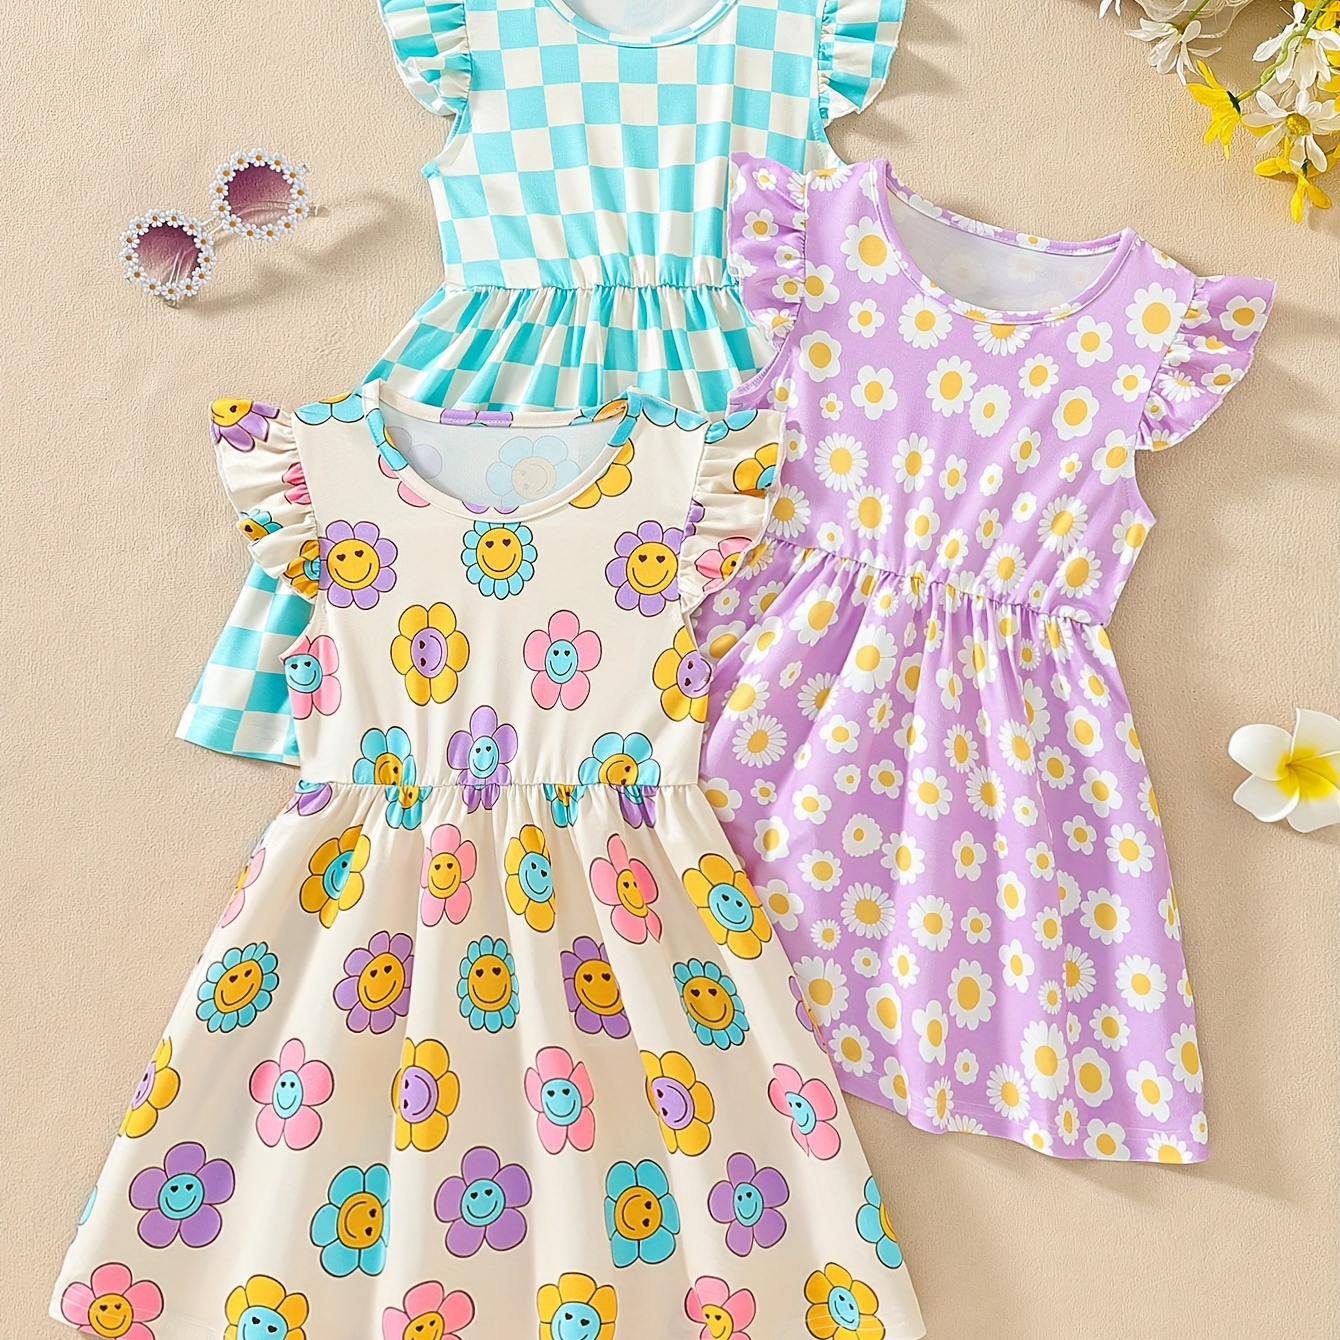 

Girls Cute Dresses 3pcs/ Set, Smile Face & Flowers & Checkered Print A-line Ruffle Sleeve Dress For Holiday Summer